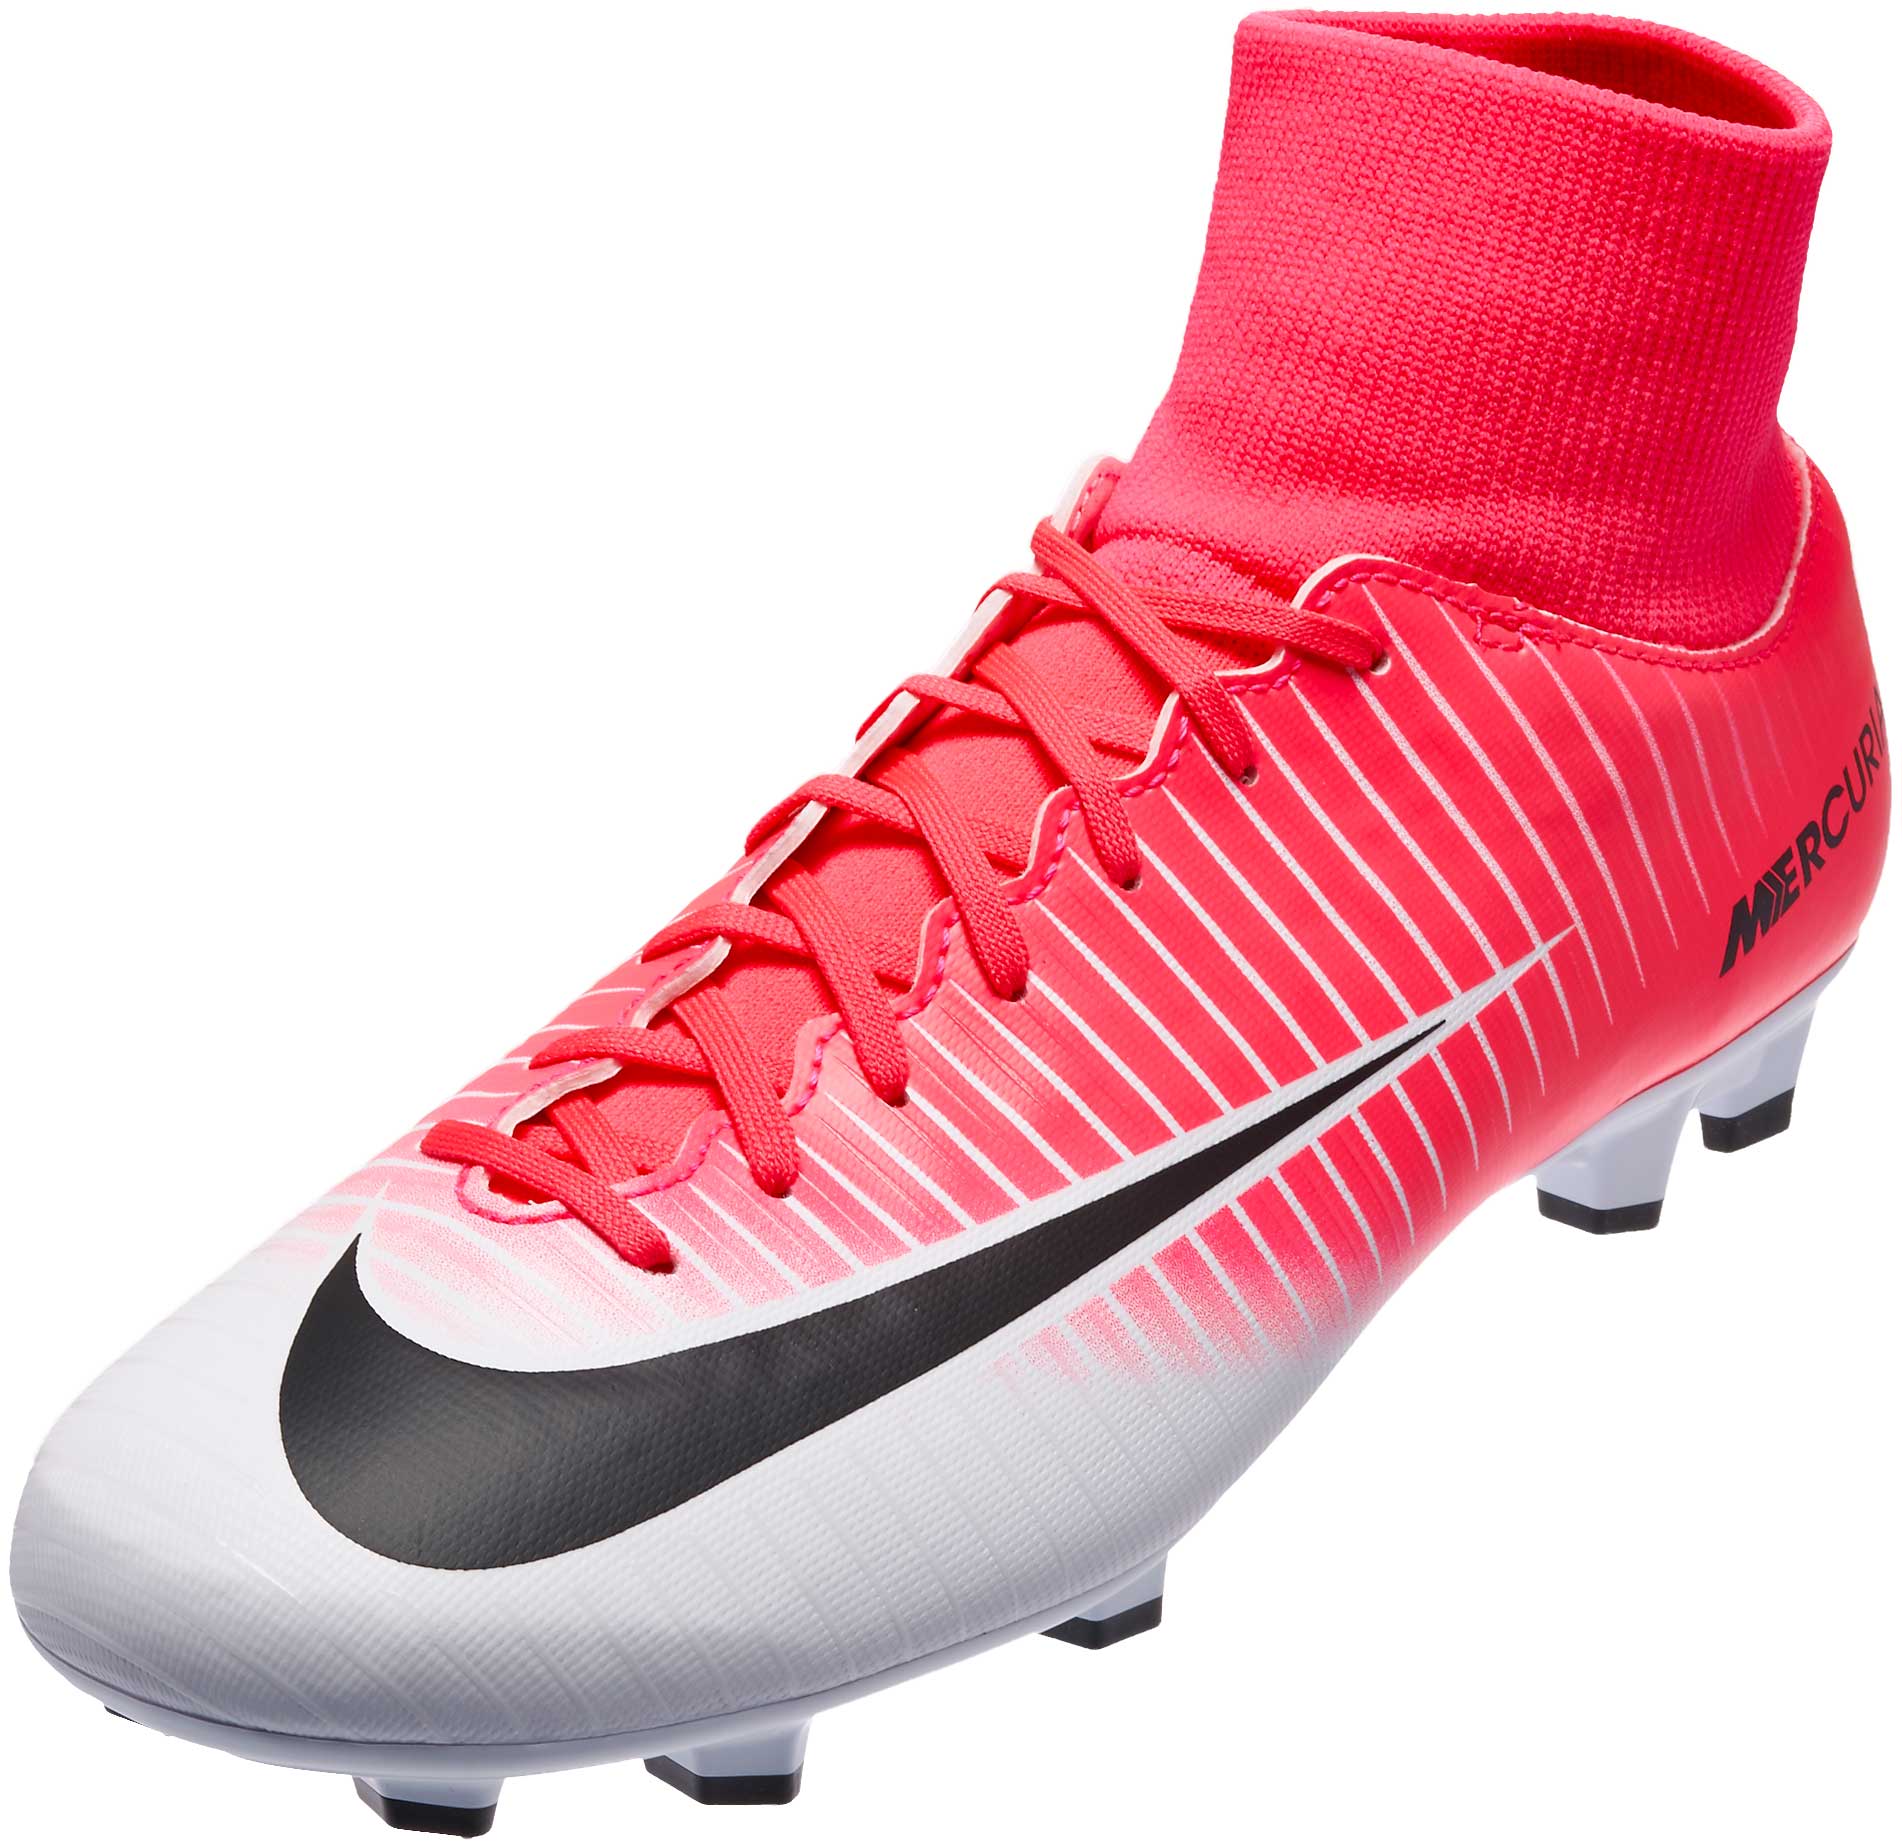 nike pink soccer boots